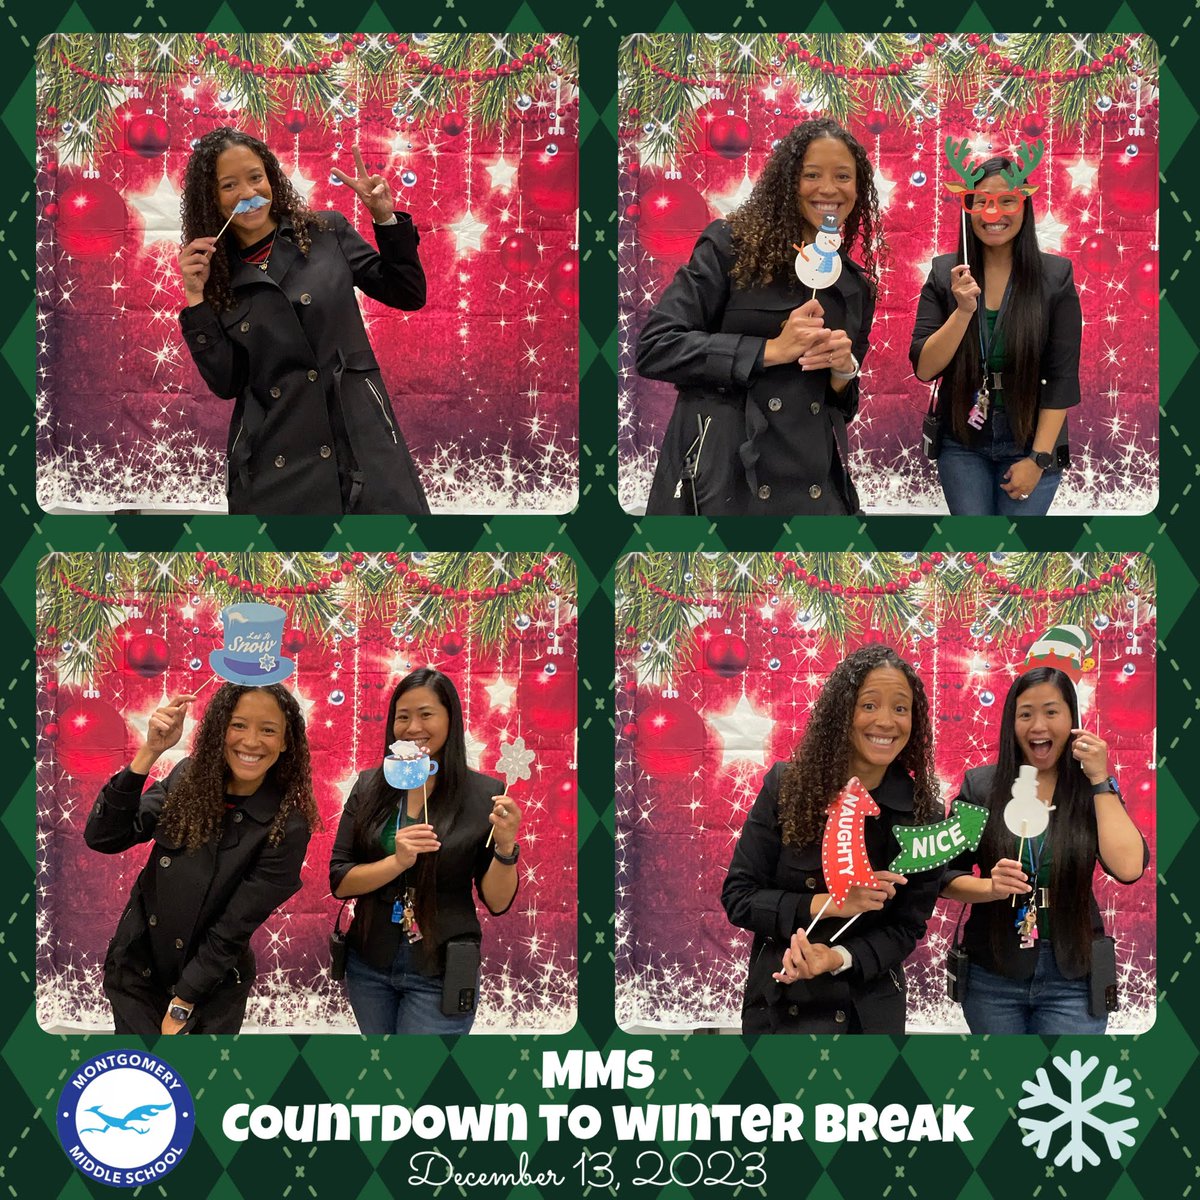 Thank you for sharing these moments. These pictures are just a bit of my own moments throughout it. (2/2)

#photobooth #YouBelong #MMSRoadrunners #MMSPride #RoadrunnerPride #YouBelongMMS #YouBelongCV #countdowntowinterbreak